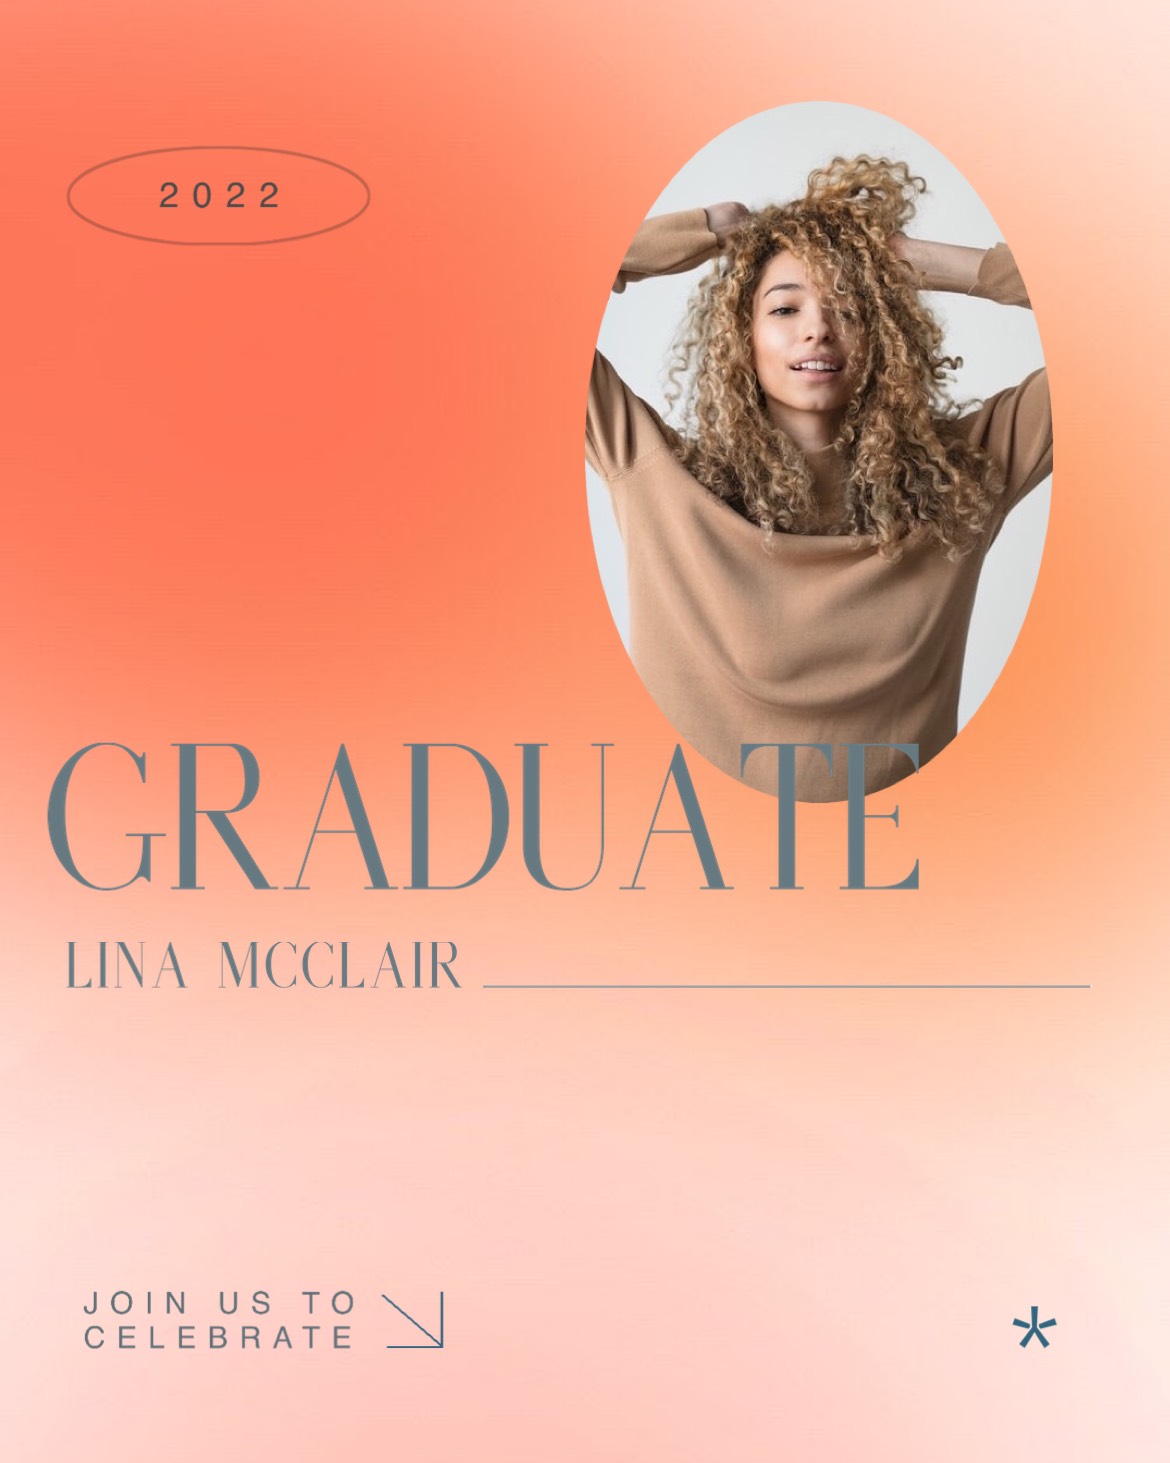 A Woman With Curly Hair Wearing A Sweater Graduation Template